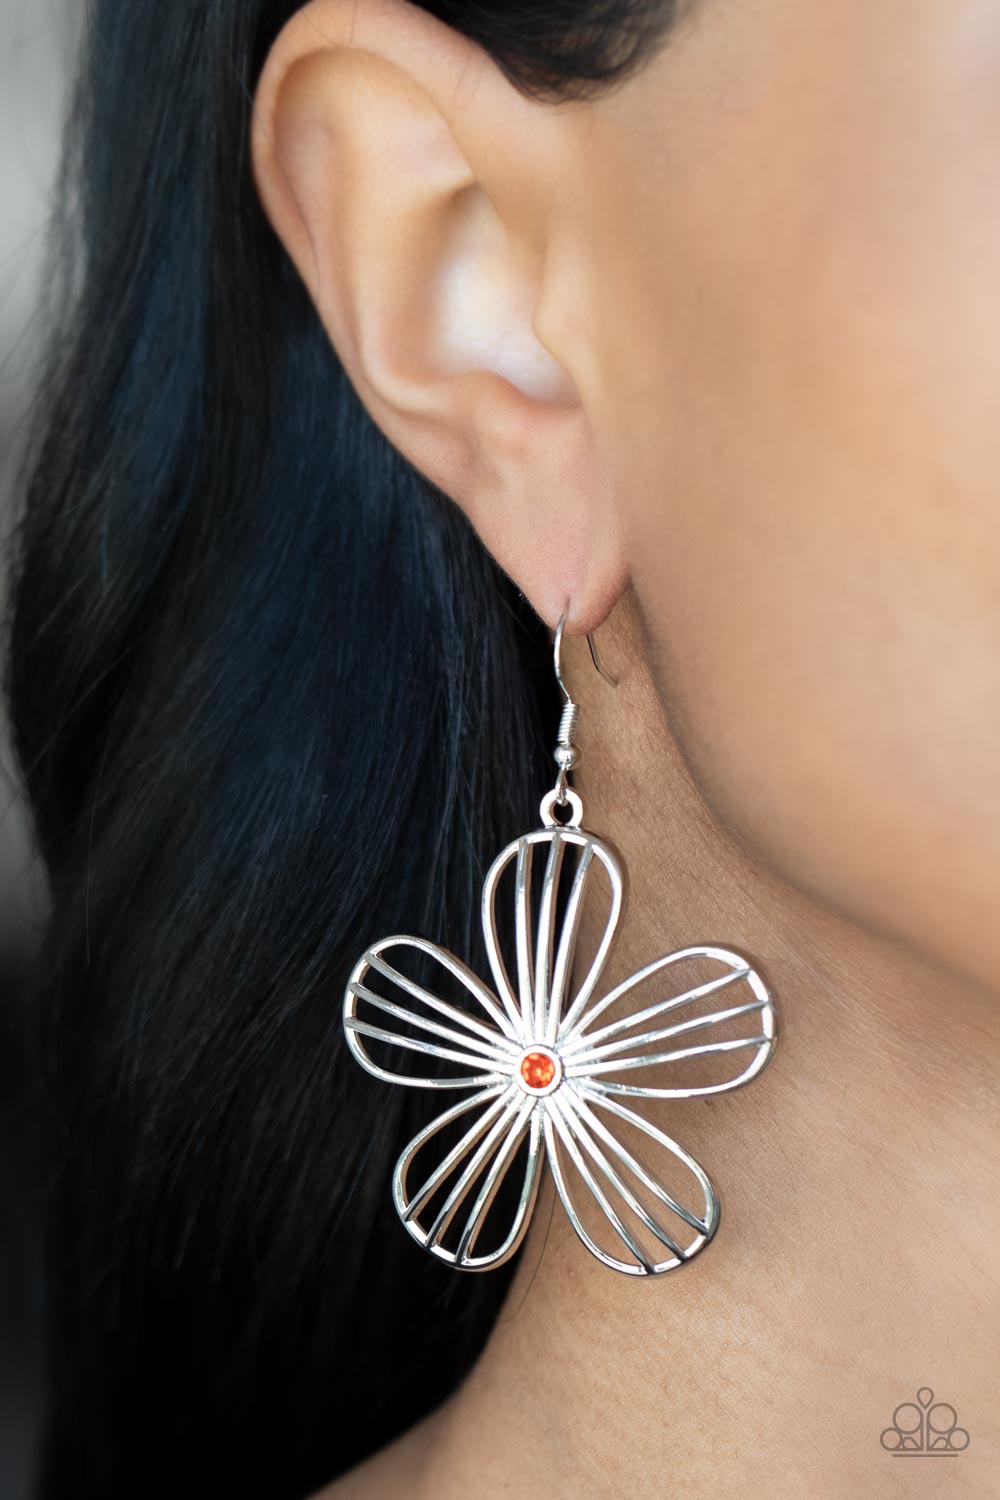 Meadow Musical - Orange and Silver Earrings - Paparazzi Accessories - Dainty orange rhinestone and airy silver petals streaked with linear bars bloom into an enchanting floral frame. Earring attaches to a standard fishhook fitting fashion earrings.